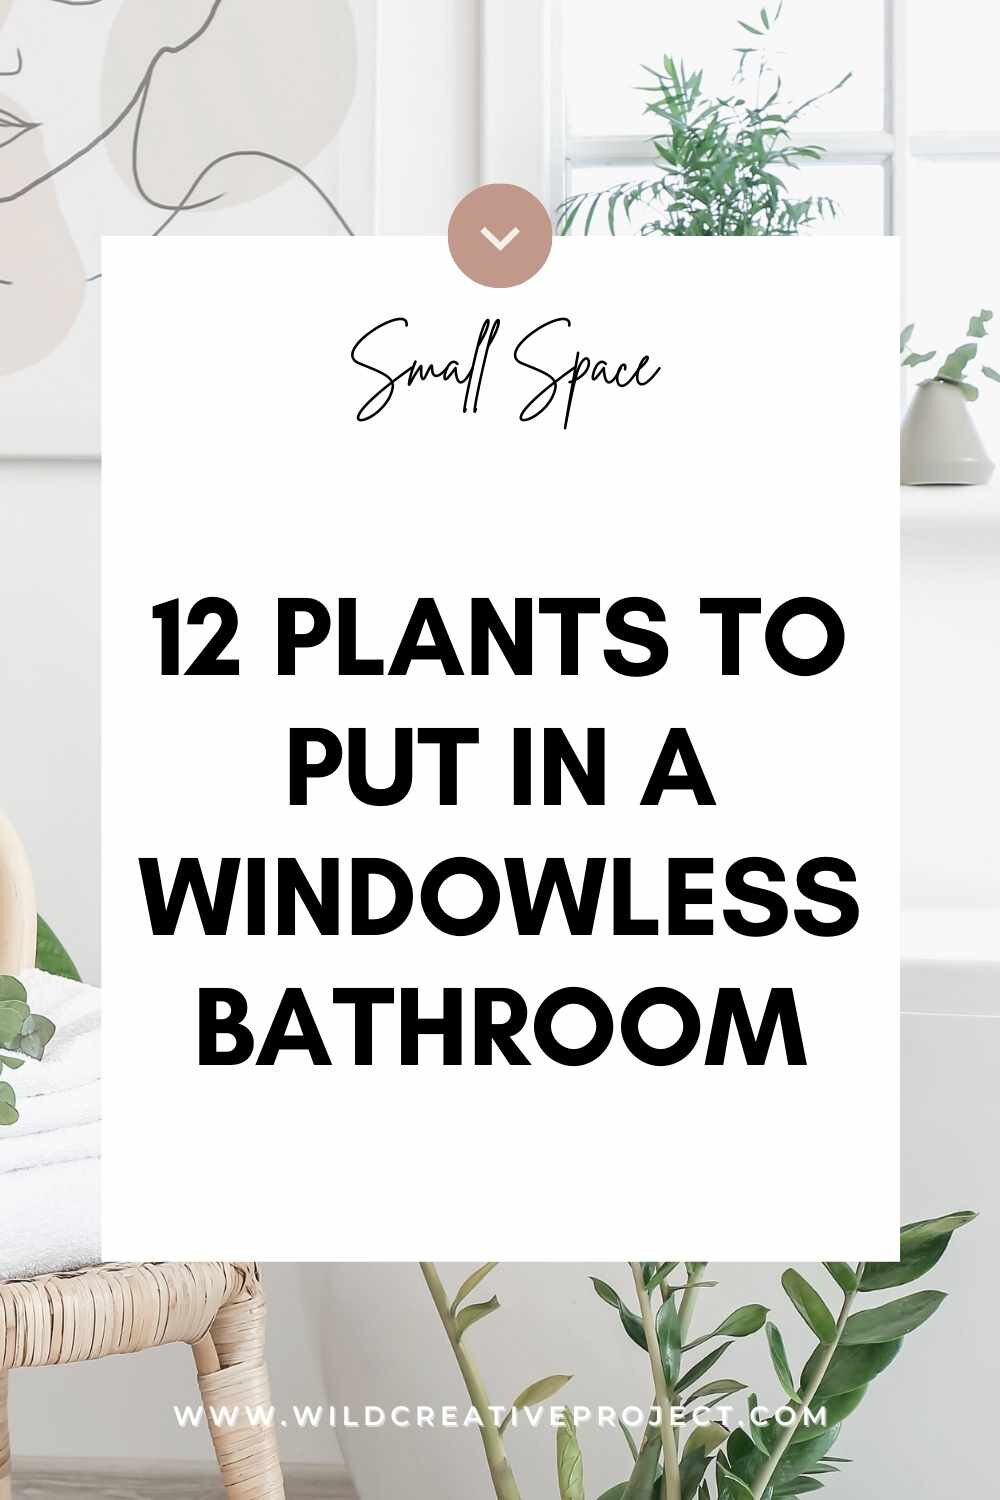  Plants That Have No Problem Growing In A Windowless Bathroom Wild Creative Project - Indoor Plants For Bathroom Without Windows